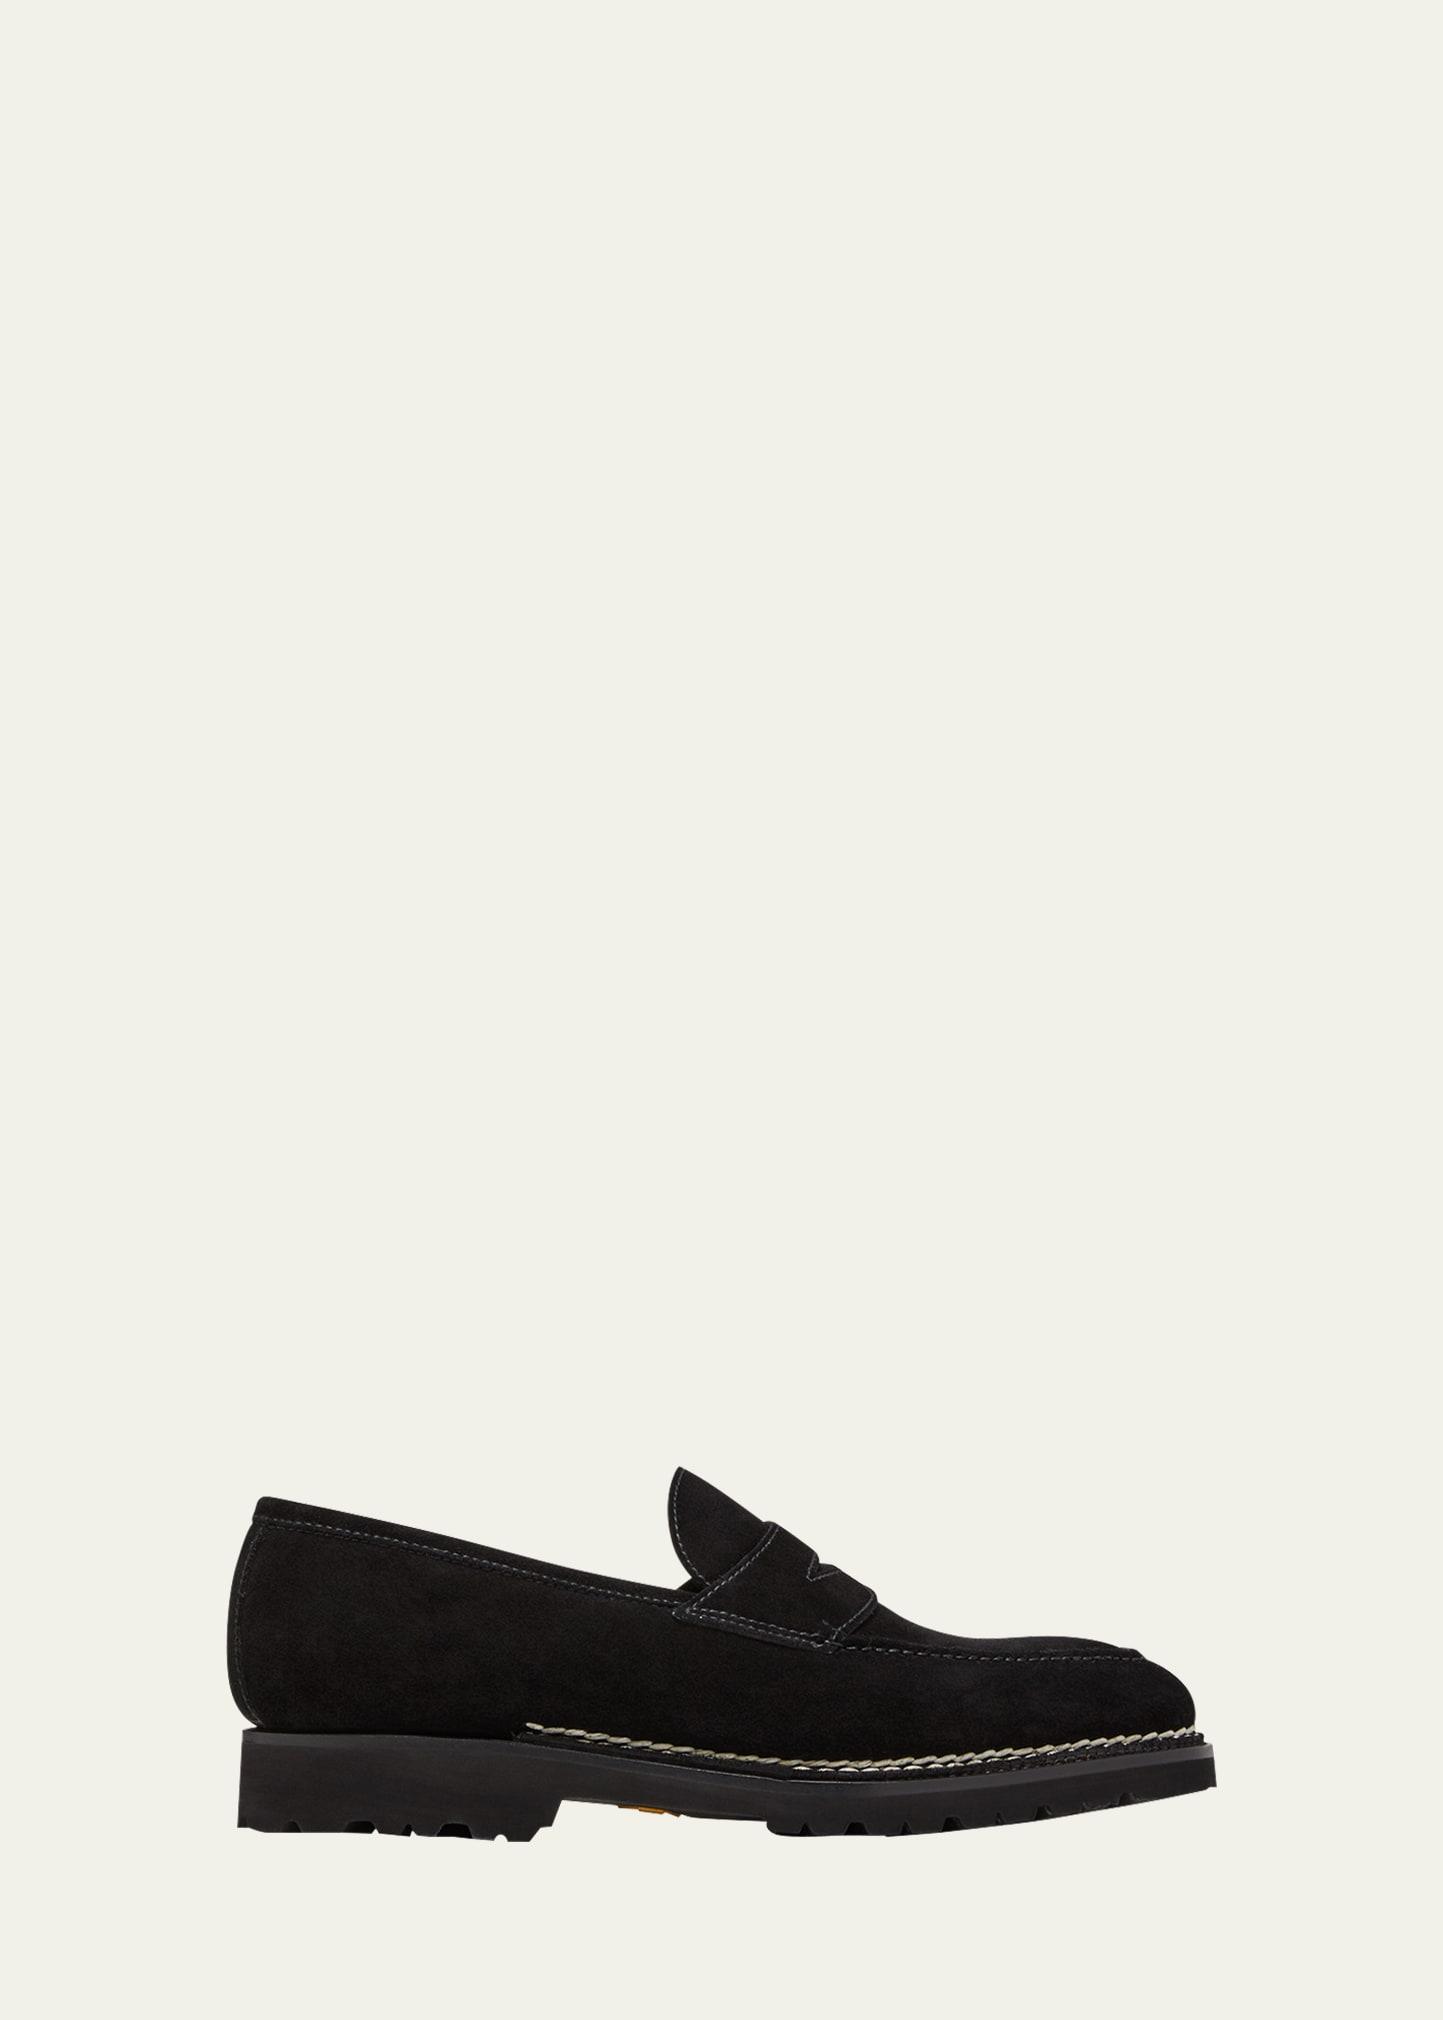 Mensy Calfskin Slip-On Loafers Product Image